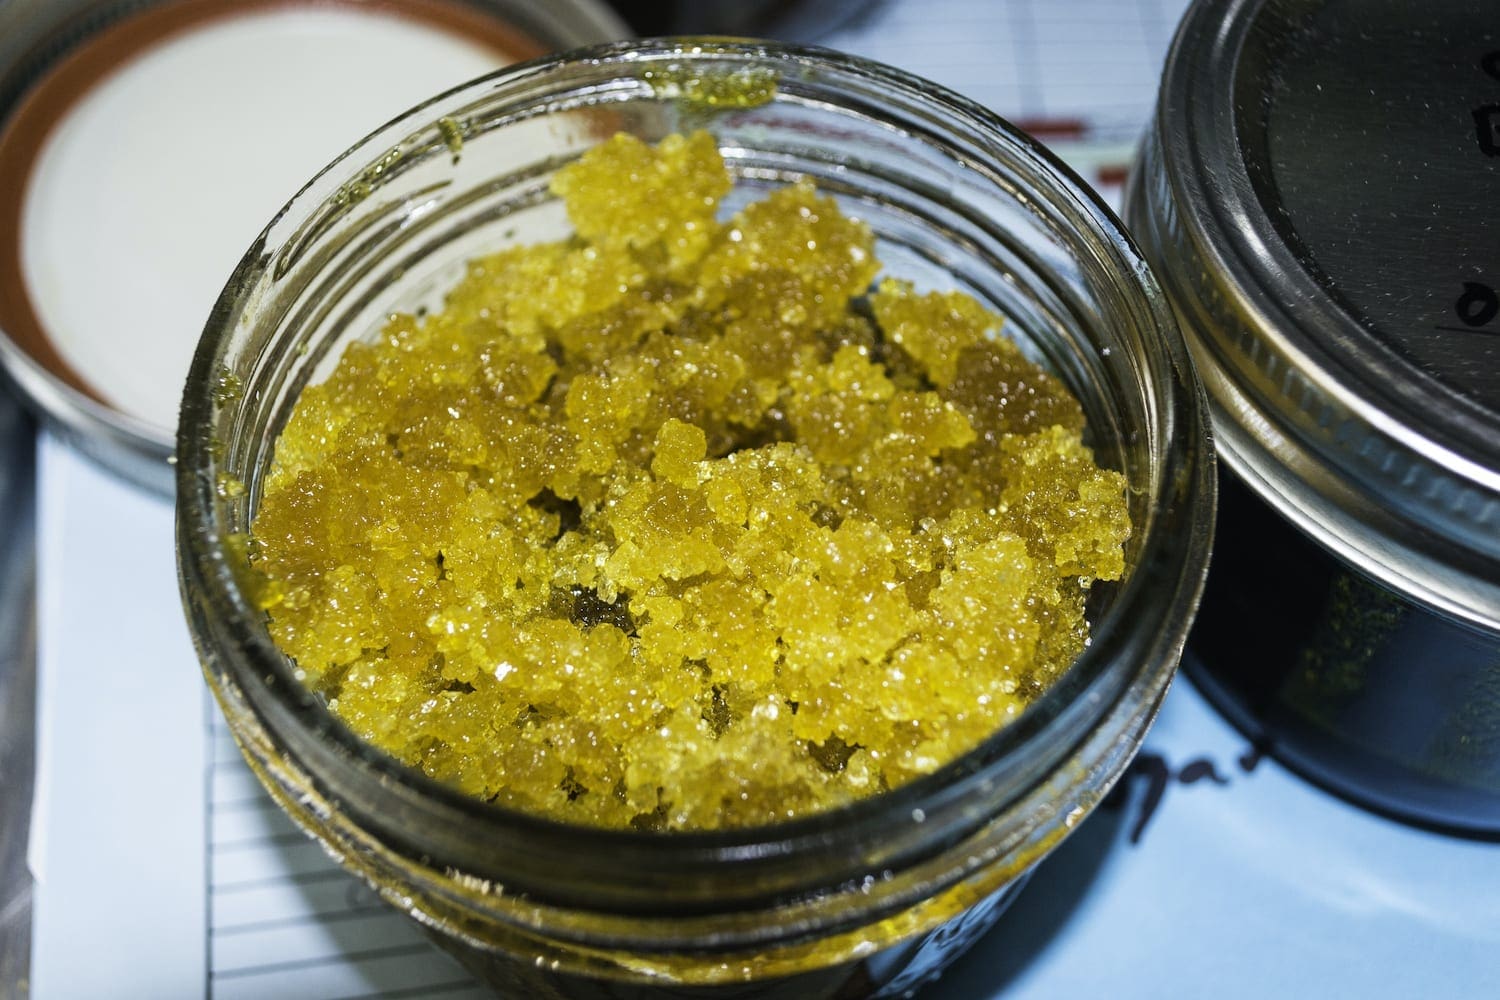 cannabis concentrate in jar